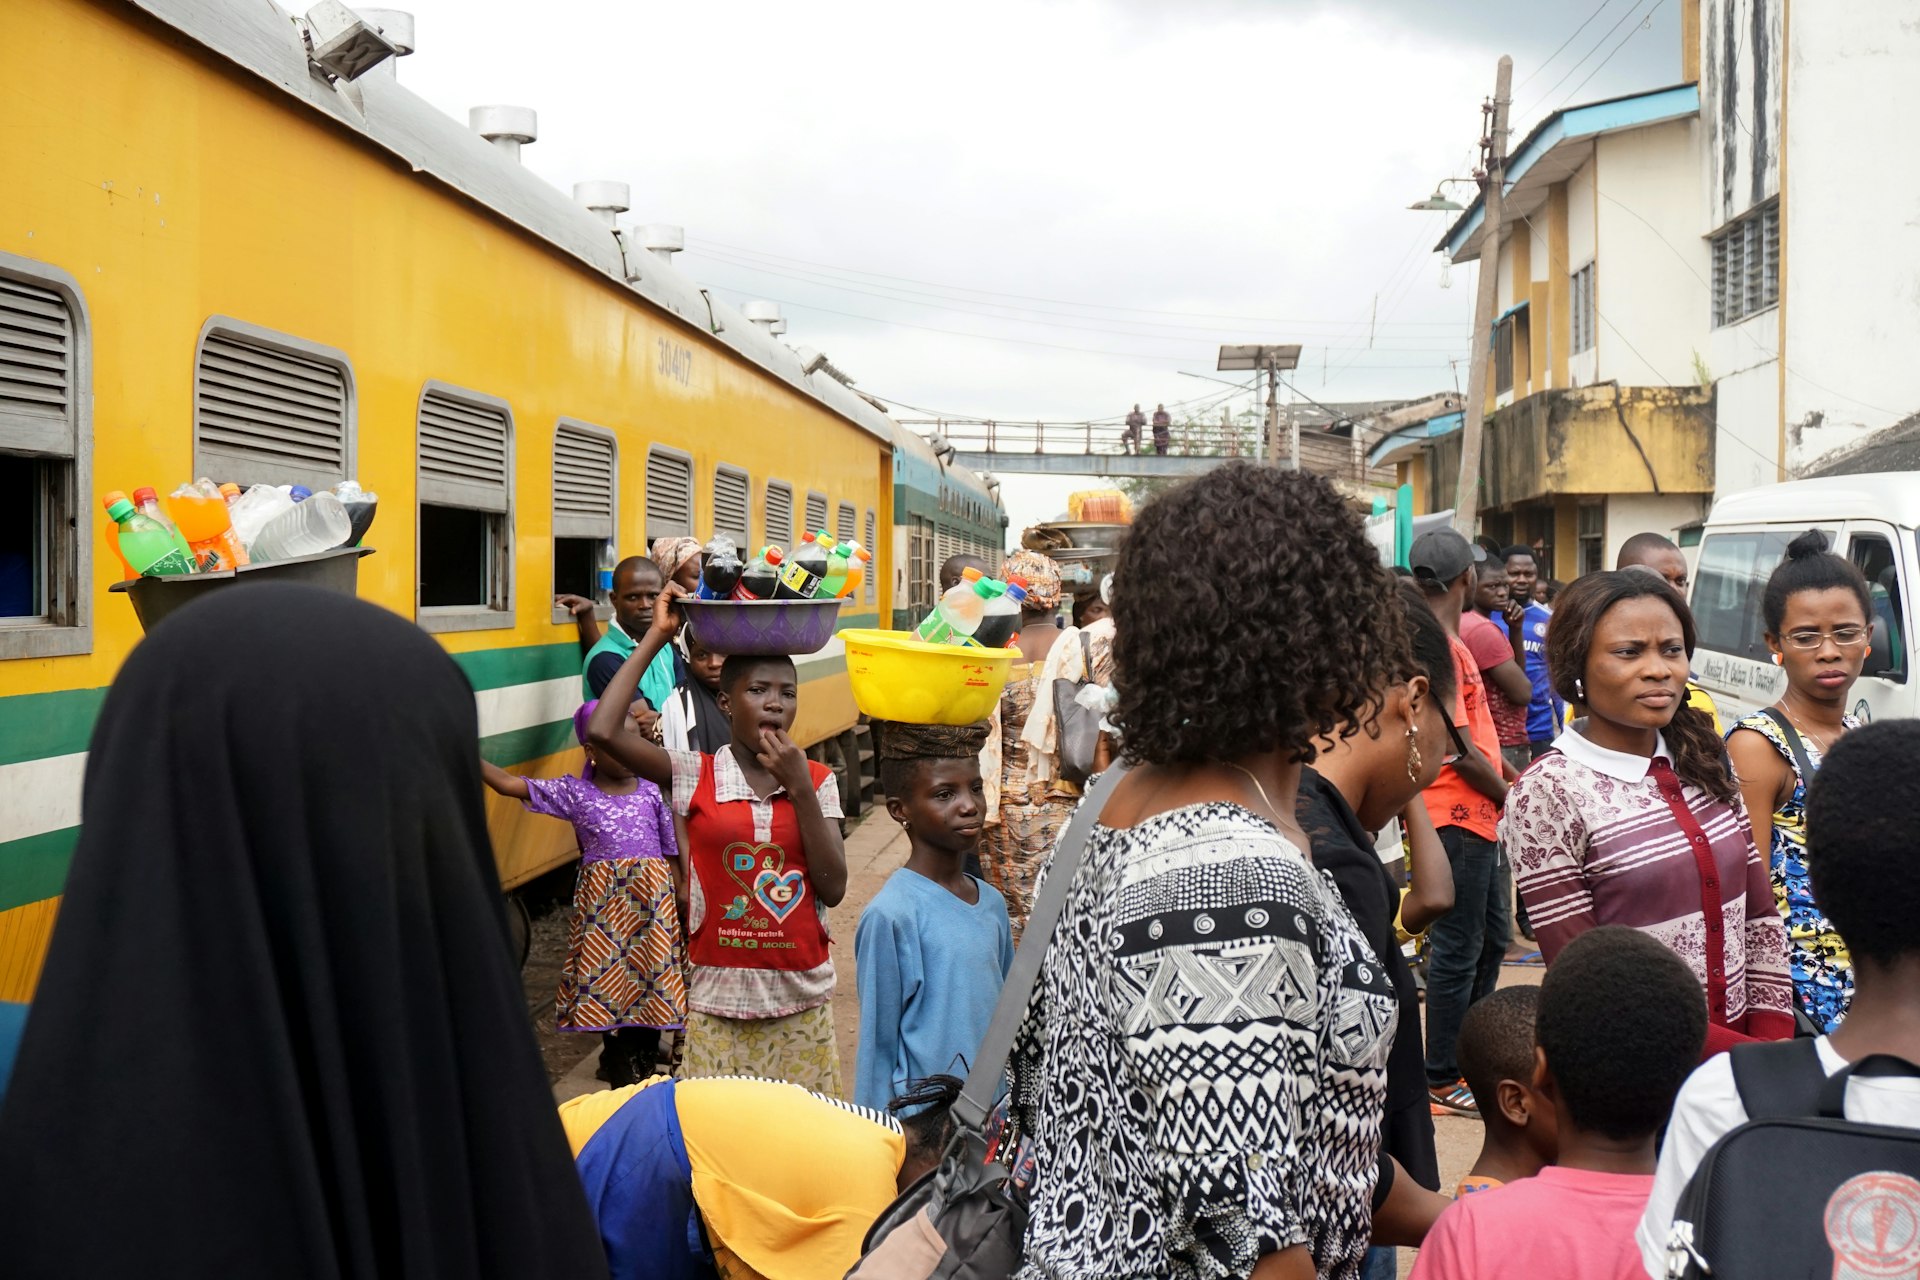 Passengers on the platform at a train station in Lagos, Nigeria